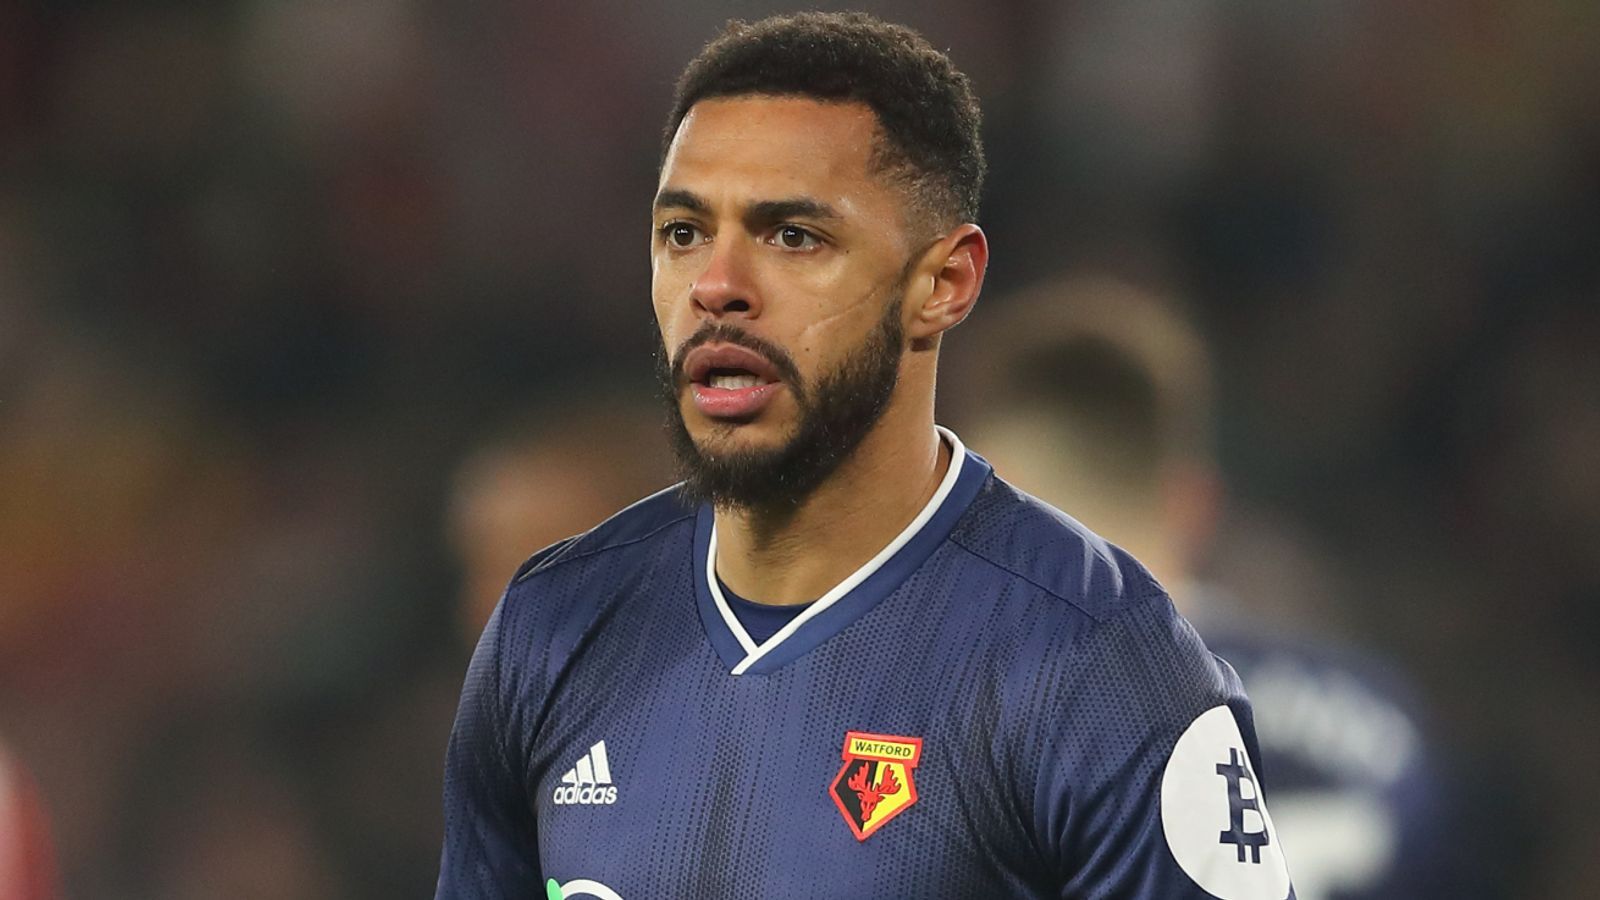 Watford star Andre Gray apologized for breaking Covid-19 lockout laws